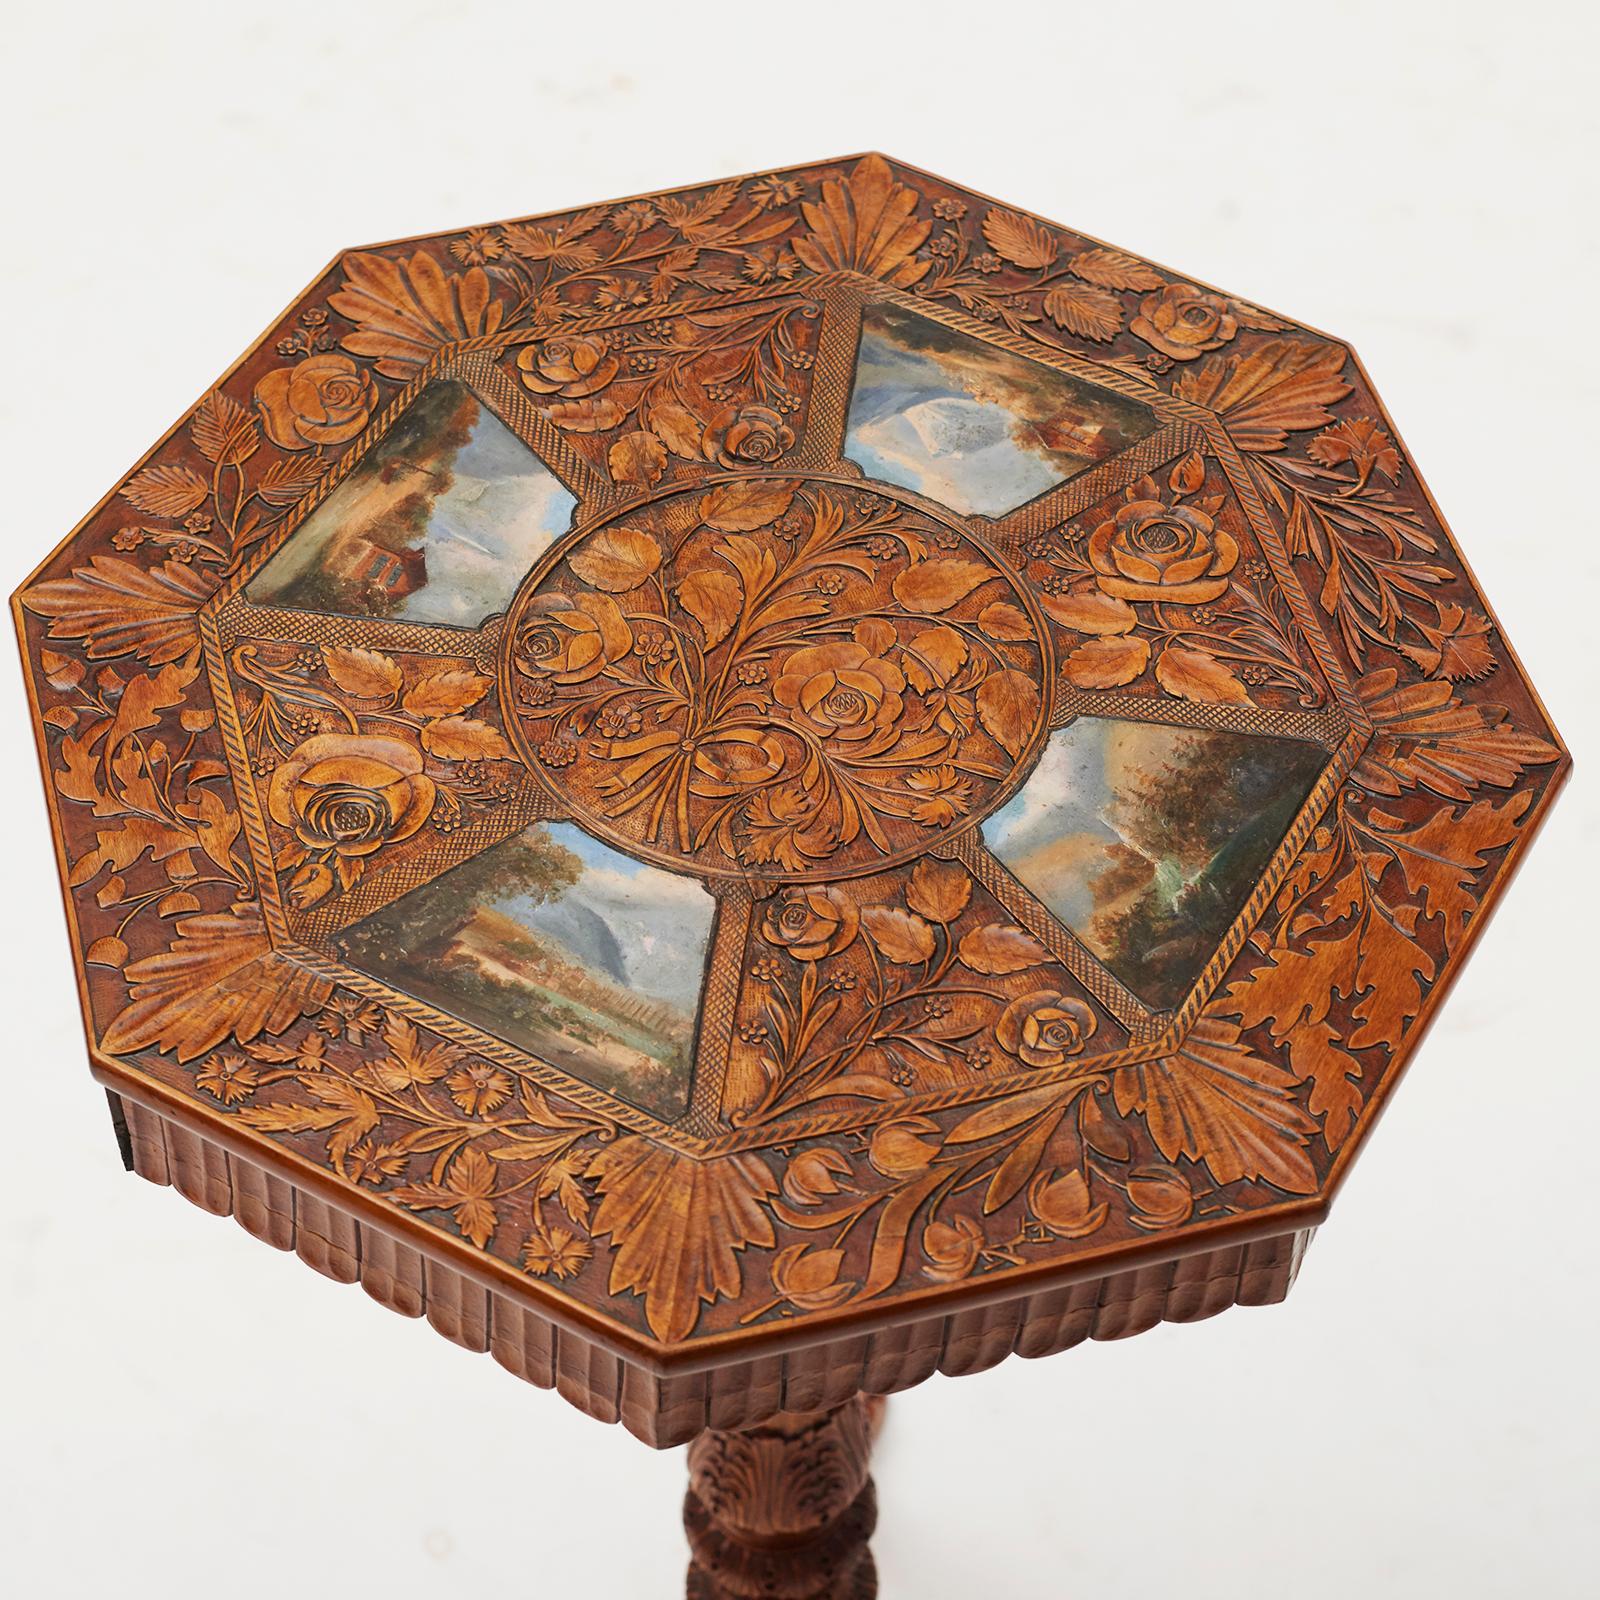 Elegant table made of cherrywood, tabletop with carvings and paintings. Three-step foot with animal table legs. 2 drawers. Ant. Italy, circa 1840.